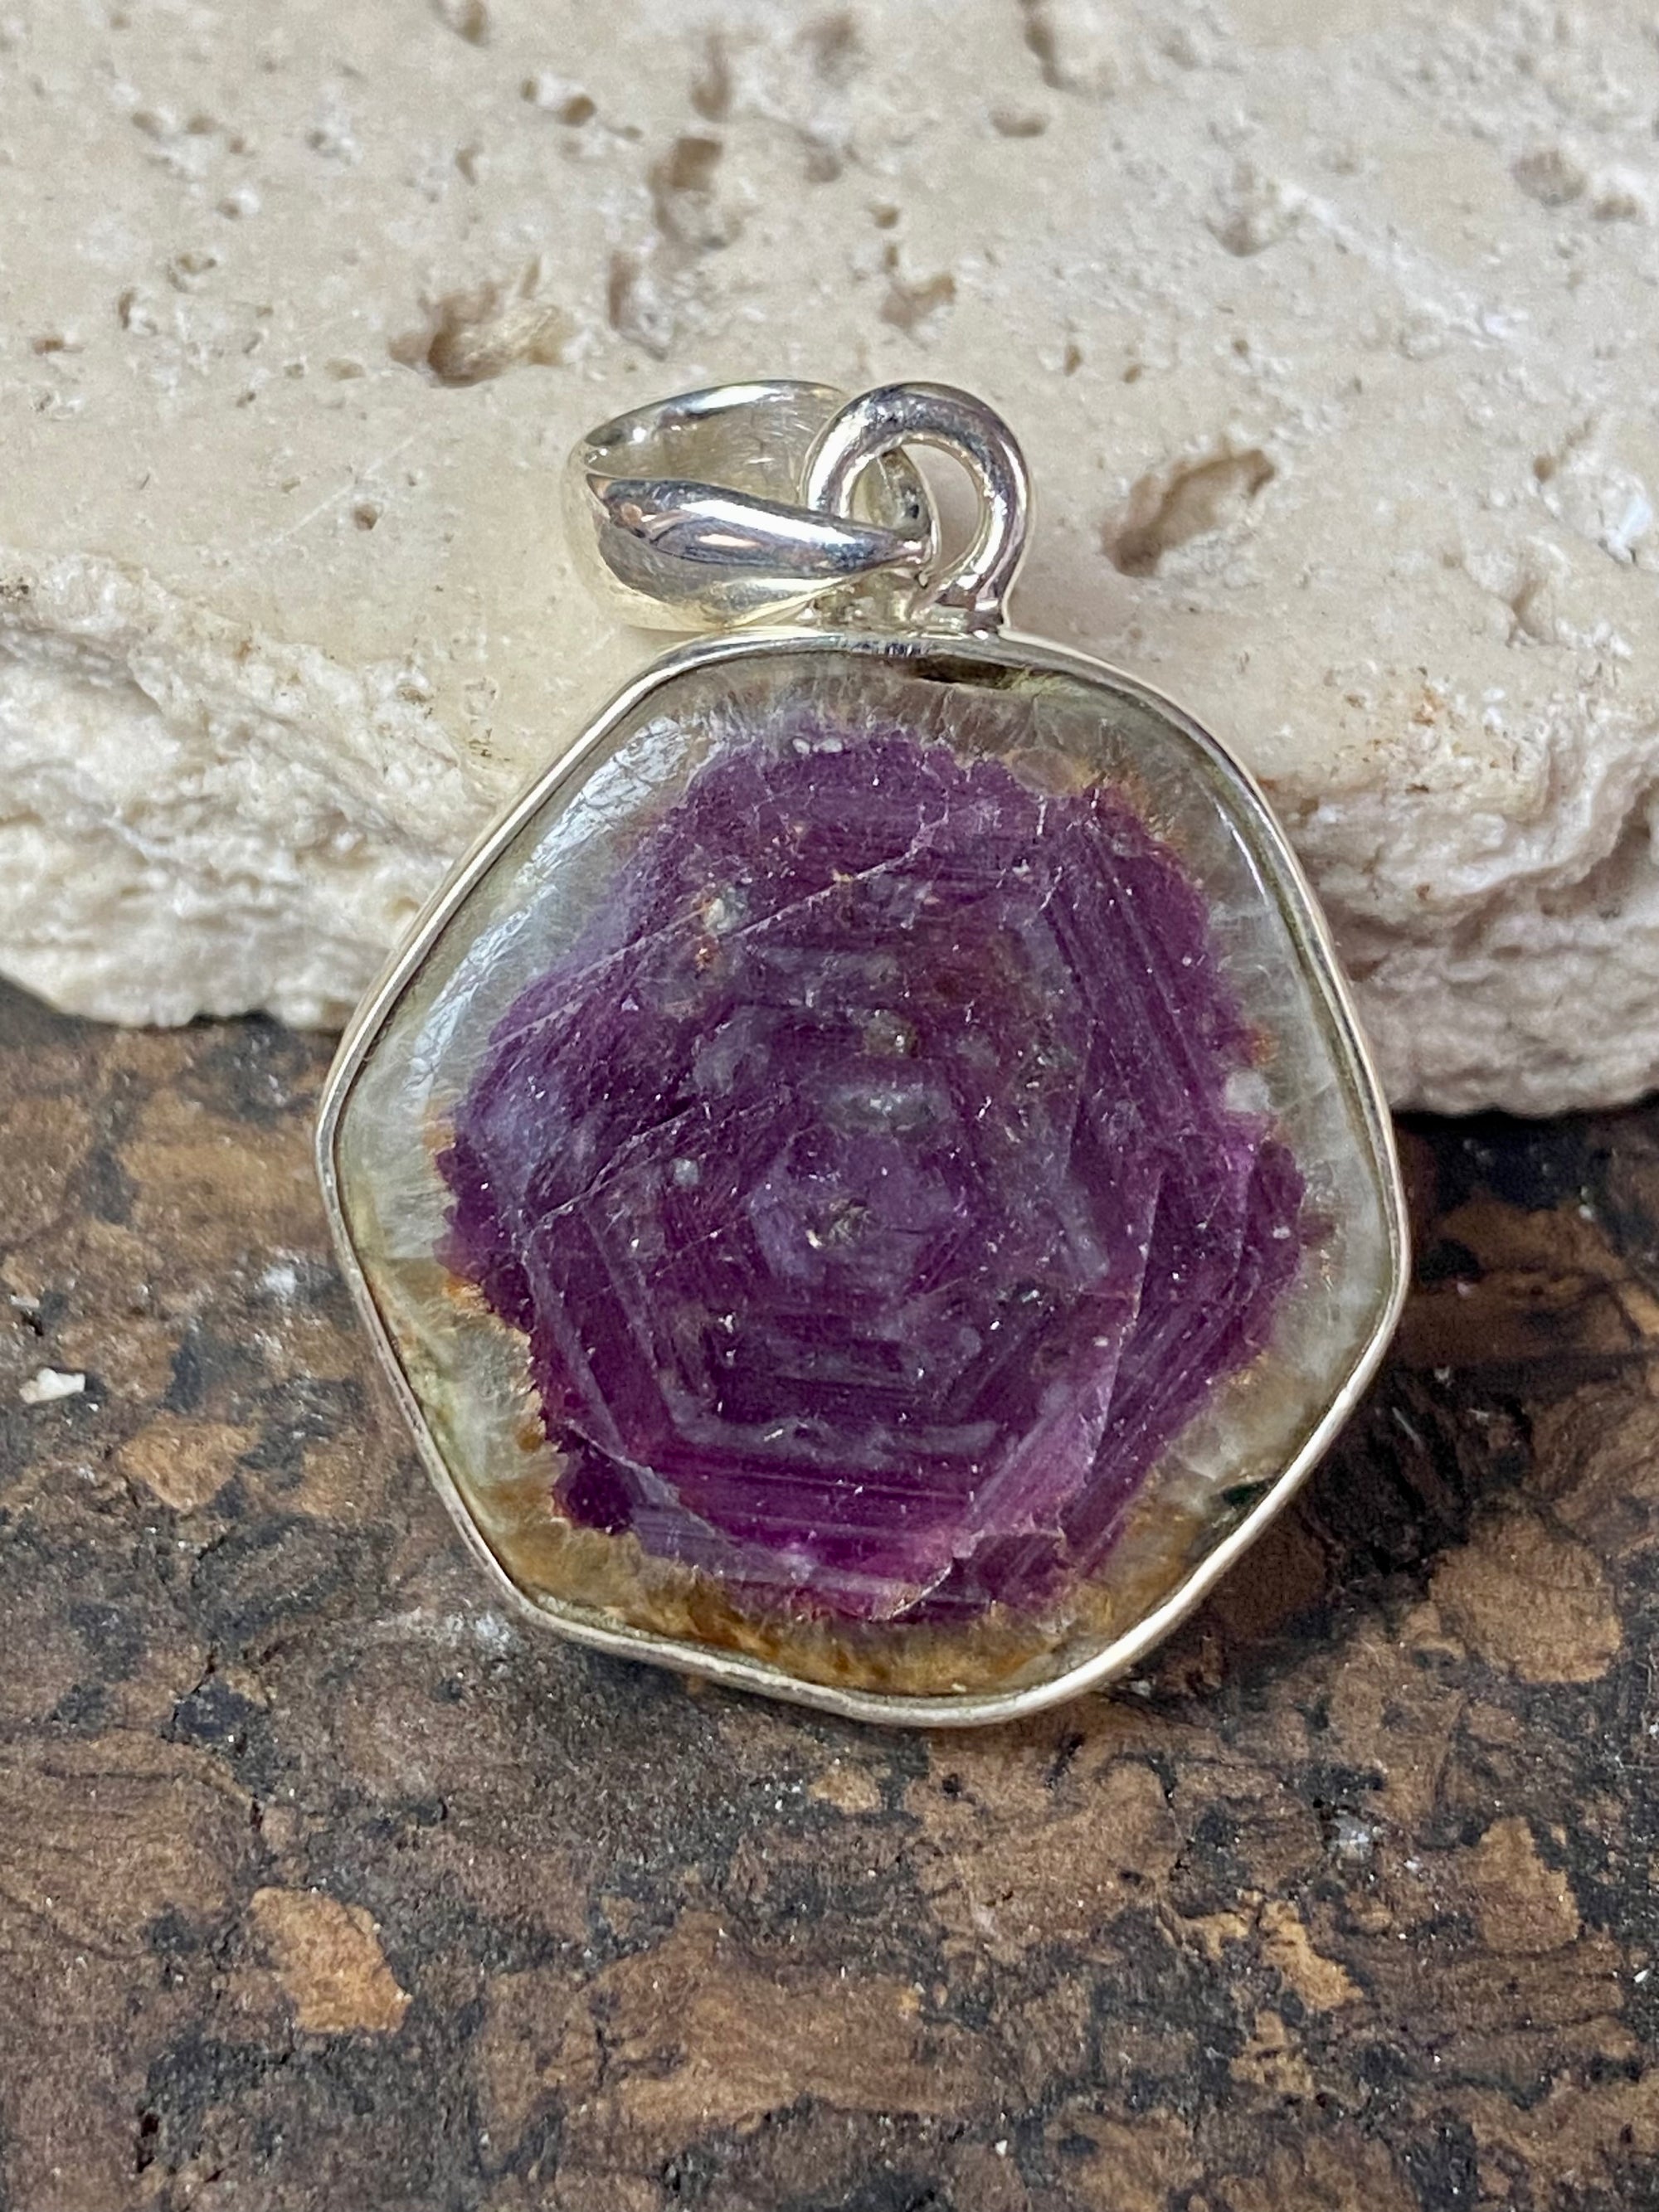 Trapiche ruby pendant with the very desirable hexagonal growth pattern, surrounded by a border of natural quartz and set in sterling silver. Height including bail 3.3 cm, width 2.2 cm